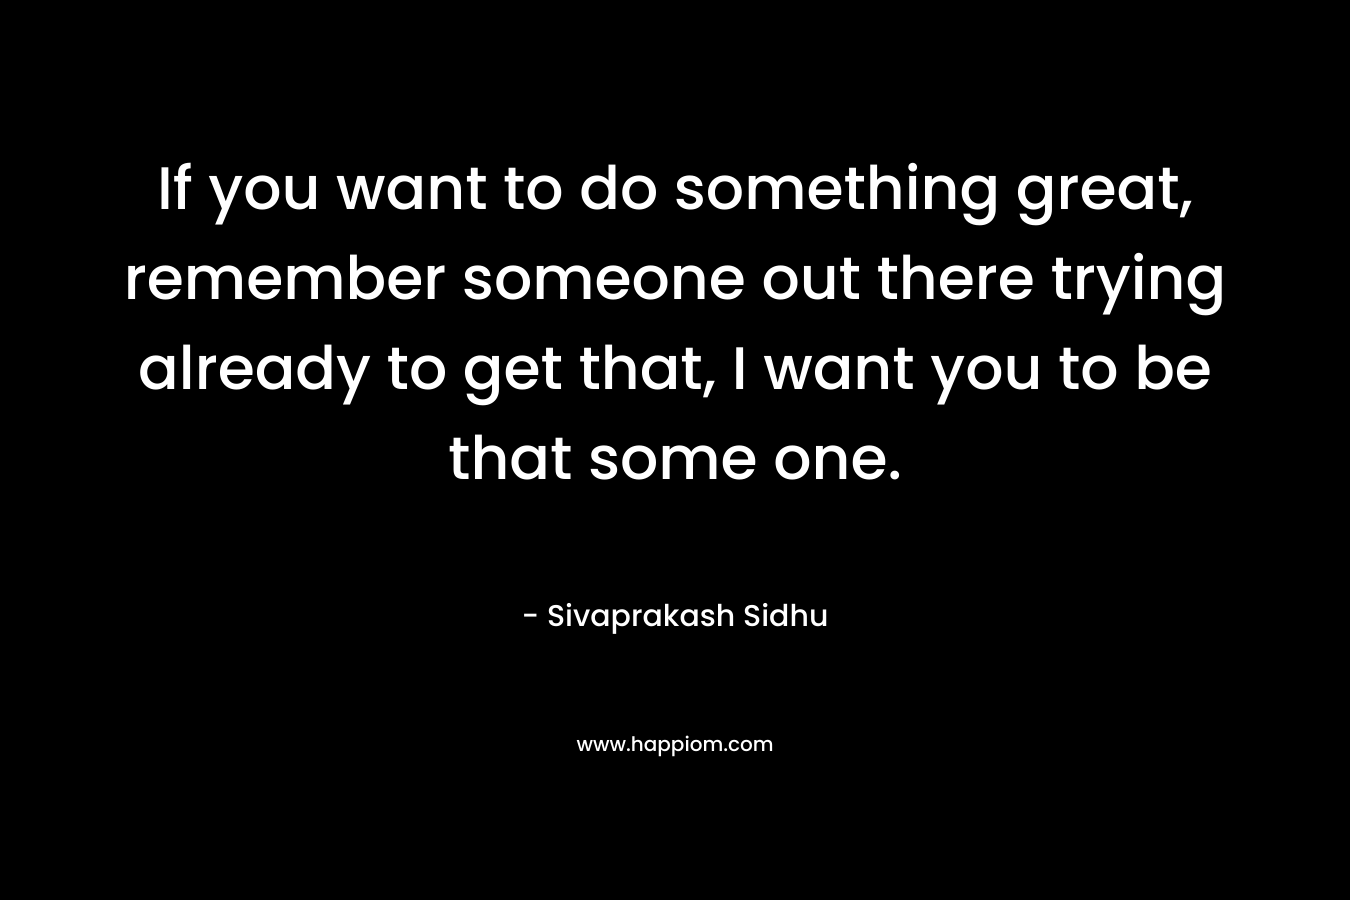 If you want to do something great, remember someone out there trying already to get that, I want you to be that some one.